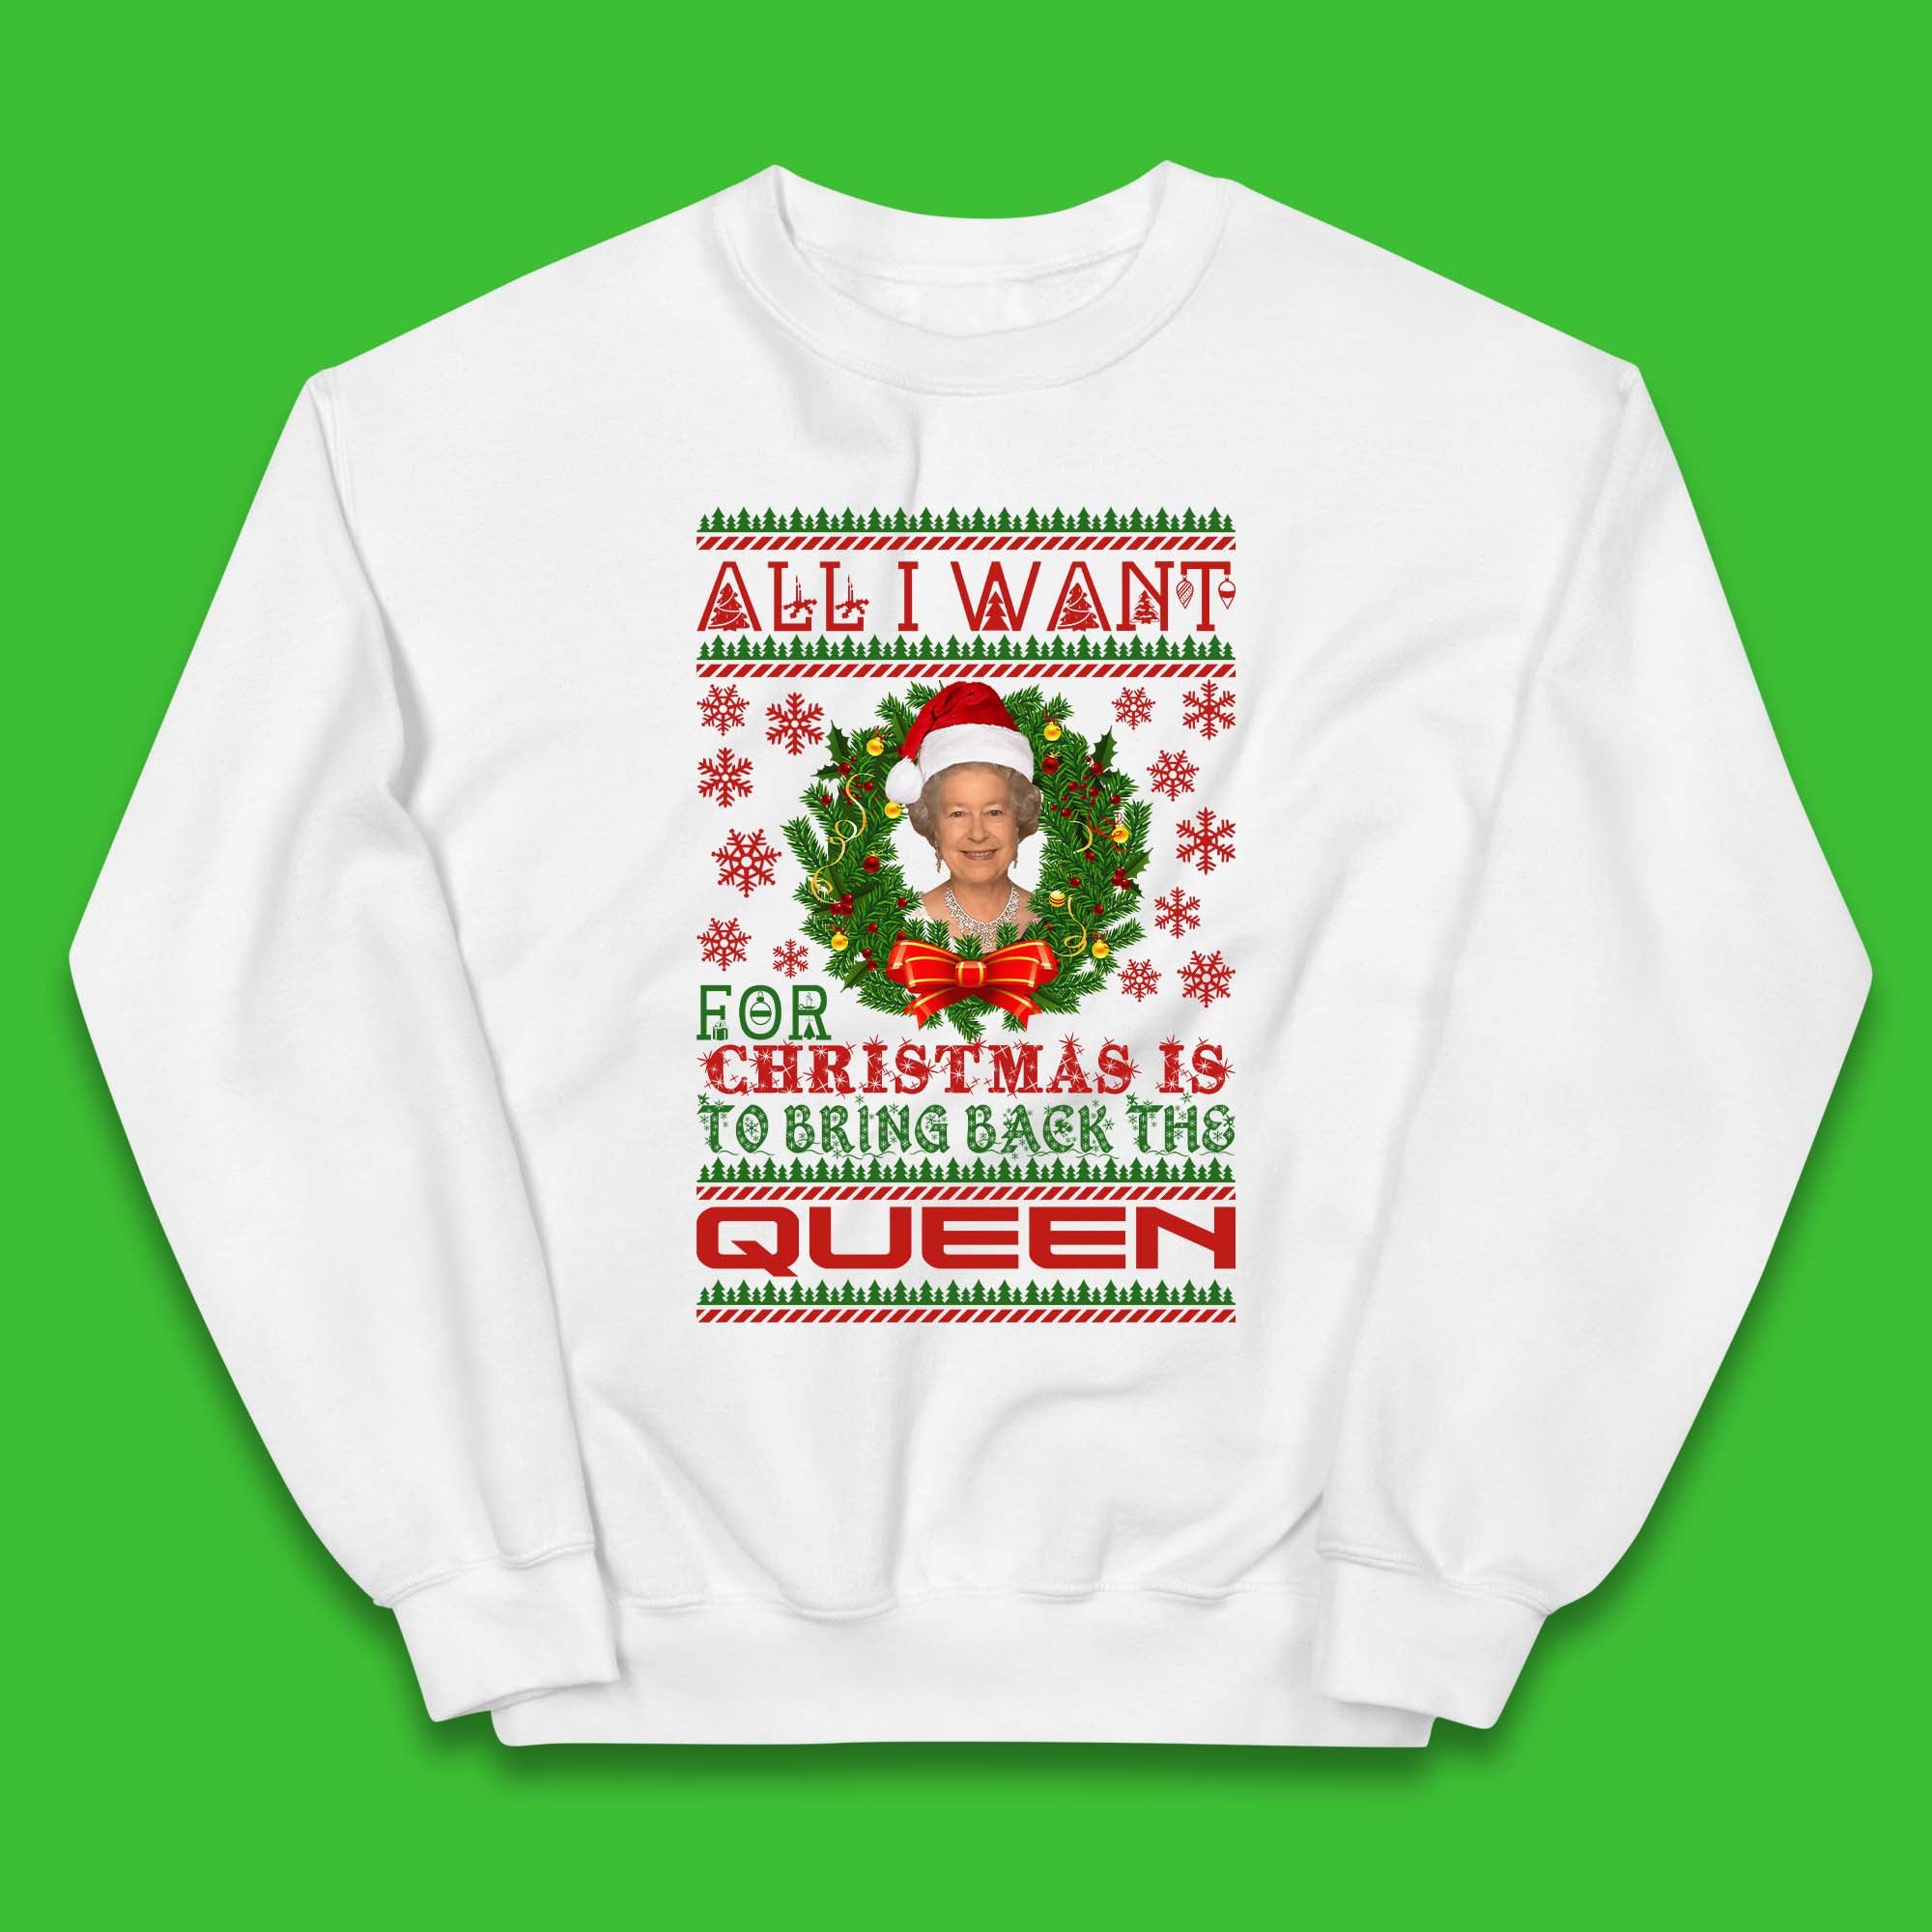 All I Want For Christmas Is To Bring The Back Queen Kids Jumper